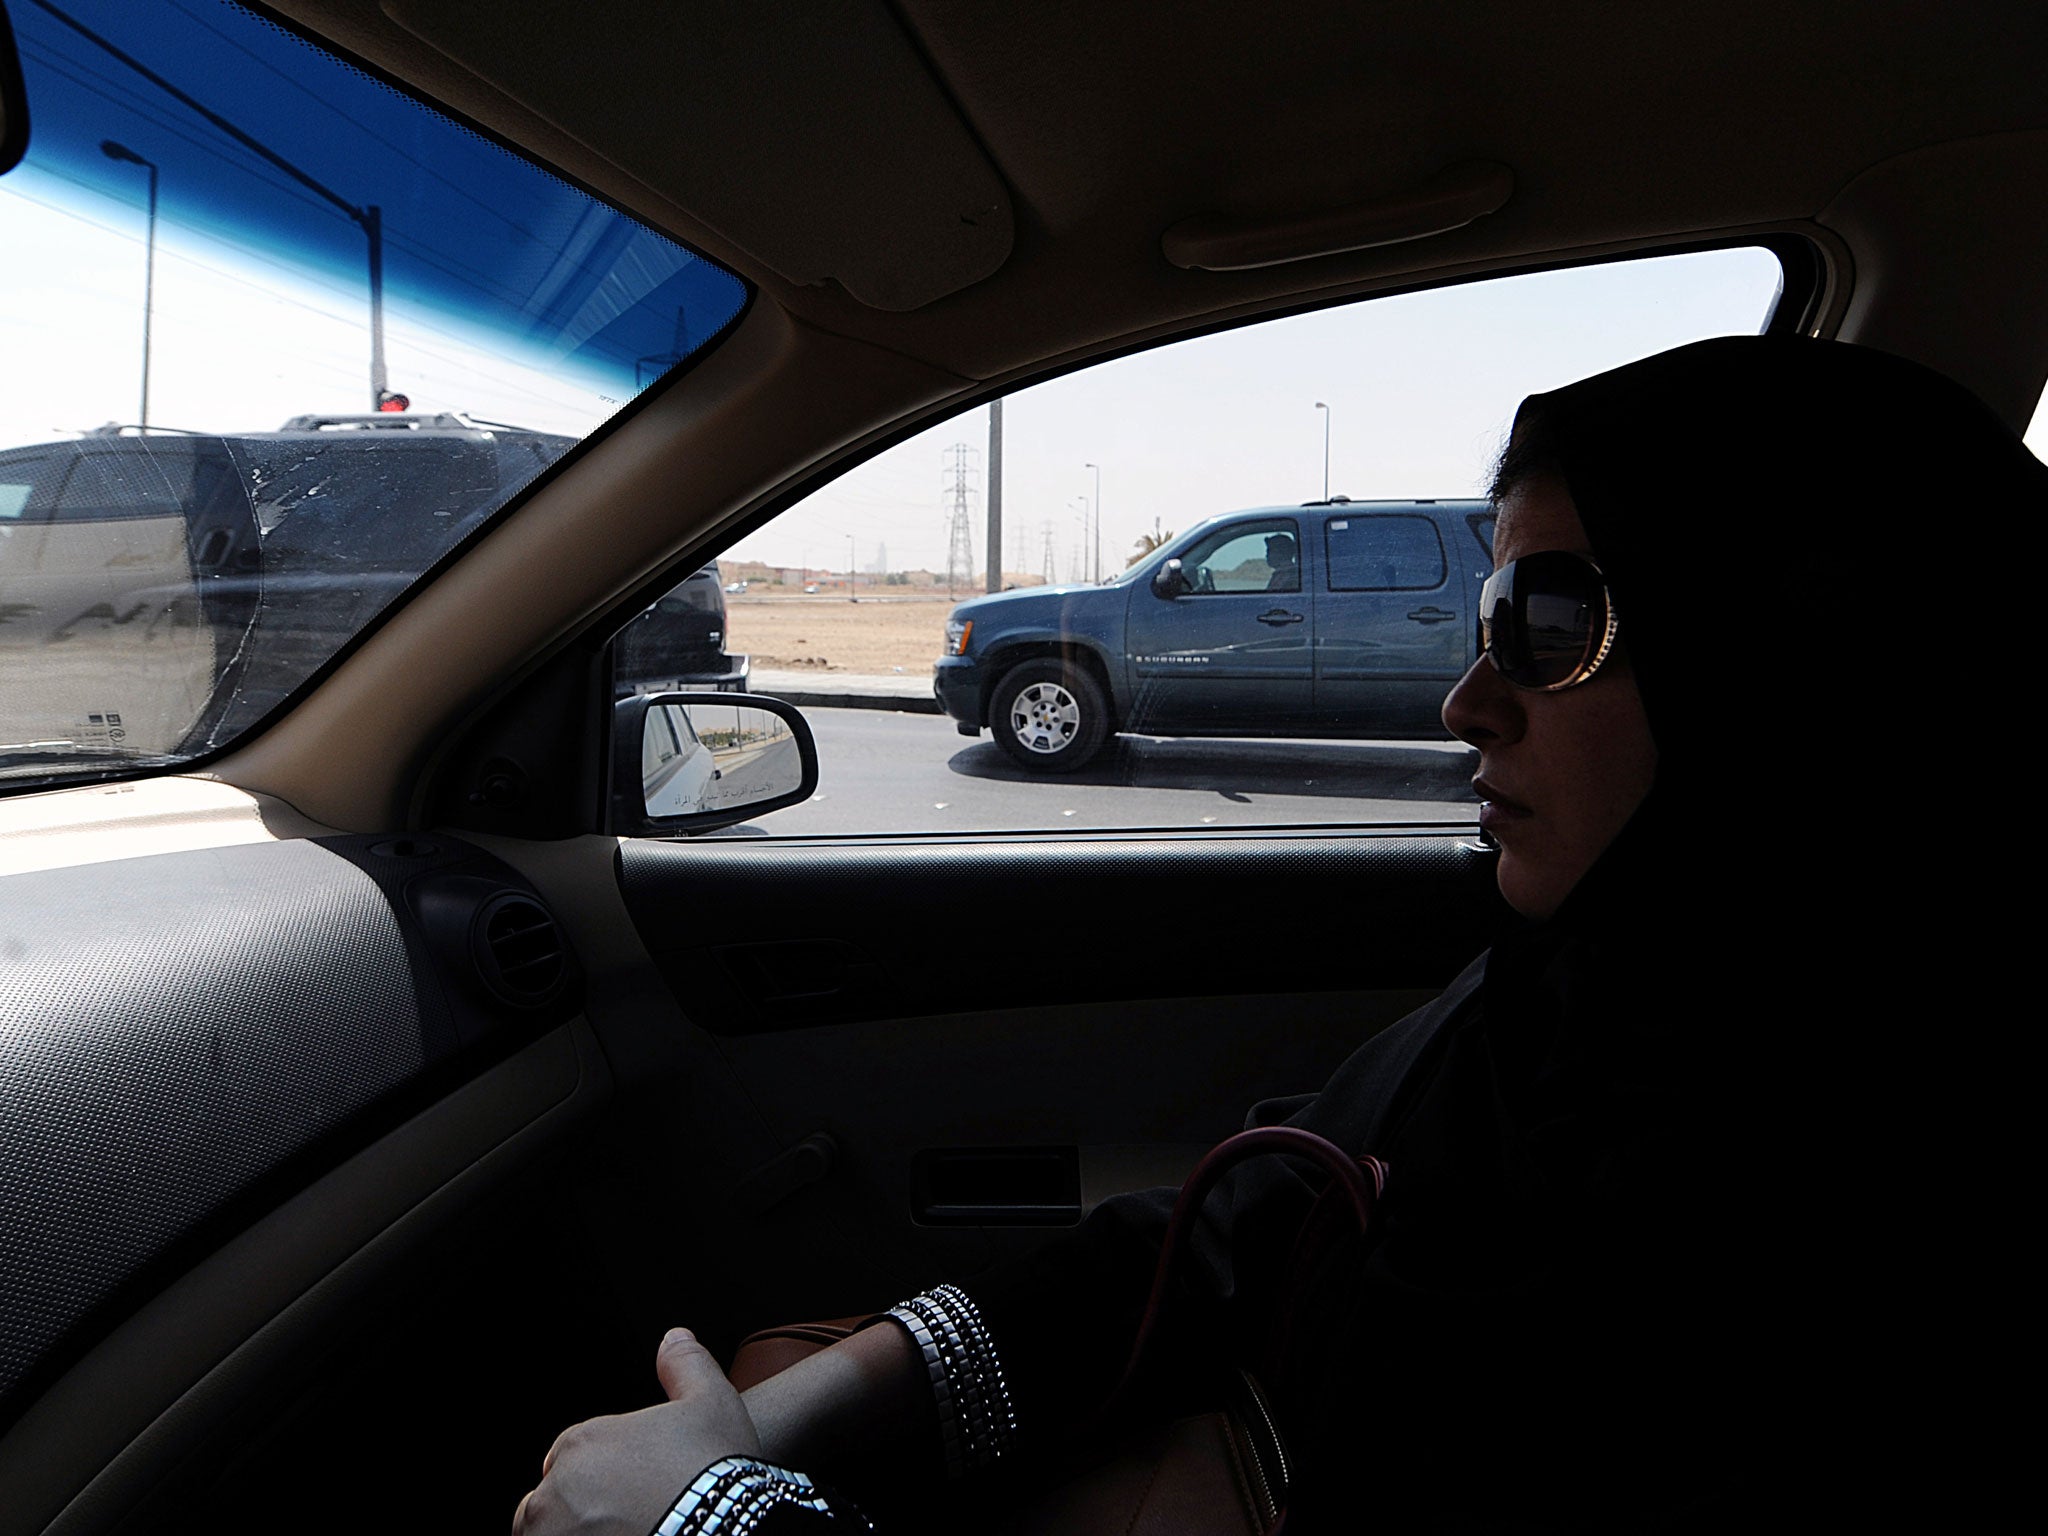 Saudi women activists have called for a new day of defiance next month of the longstanding ban on women driving.